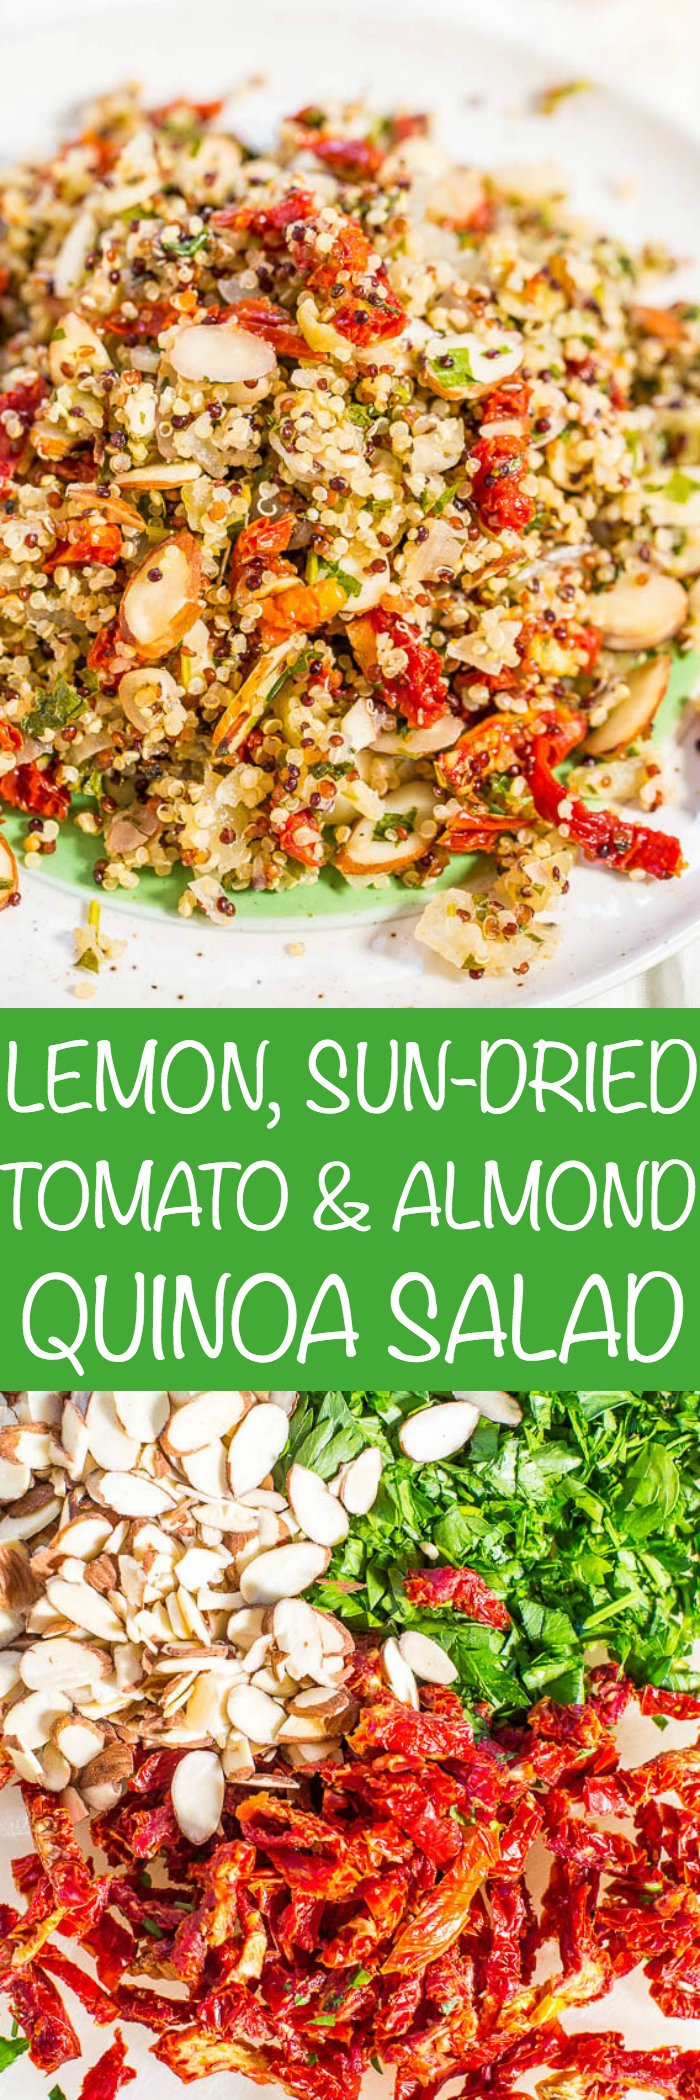 Zesty Quinoa Salad — Fast, easy, and fresh! Bright flavors and loads of texture! This clean-eating salad keeps you full and satisfied! Healthy never tasted so good!! (No mayo and great for outdoor events or lunch boxes!)